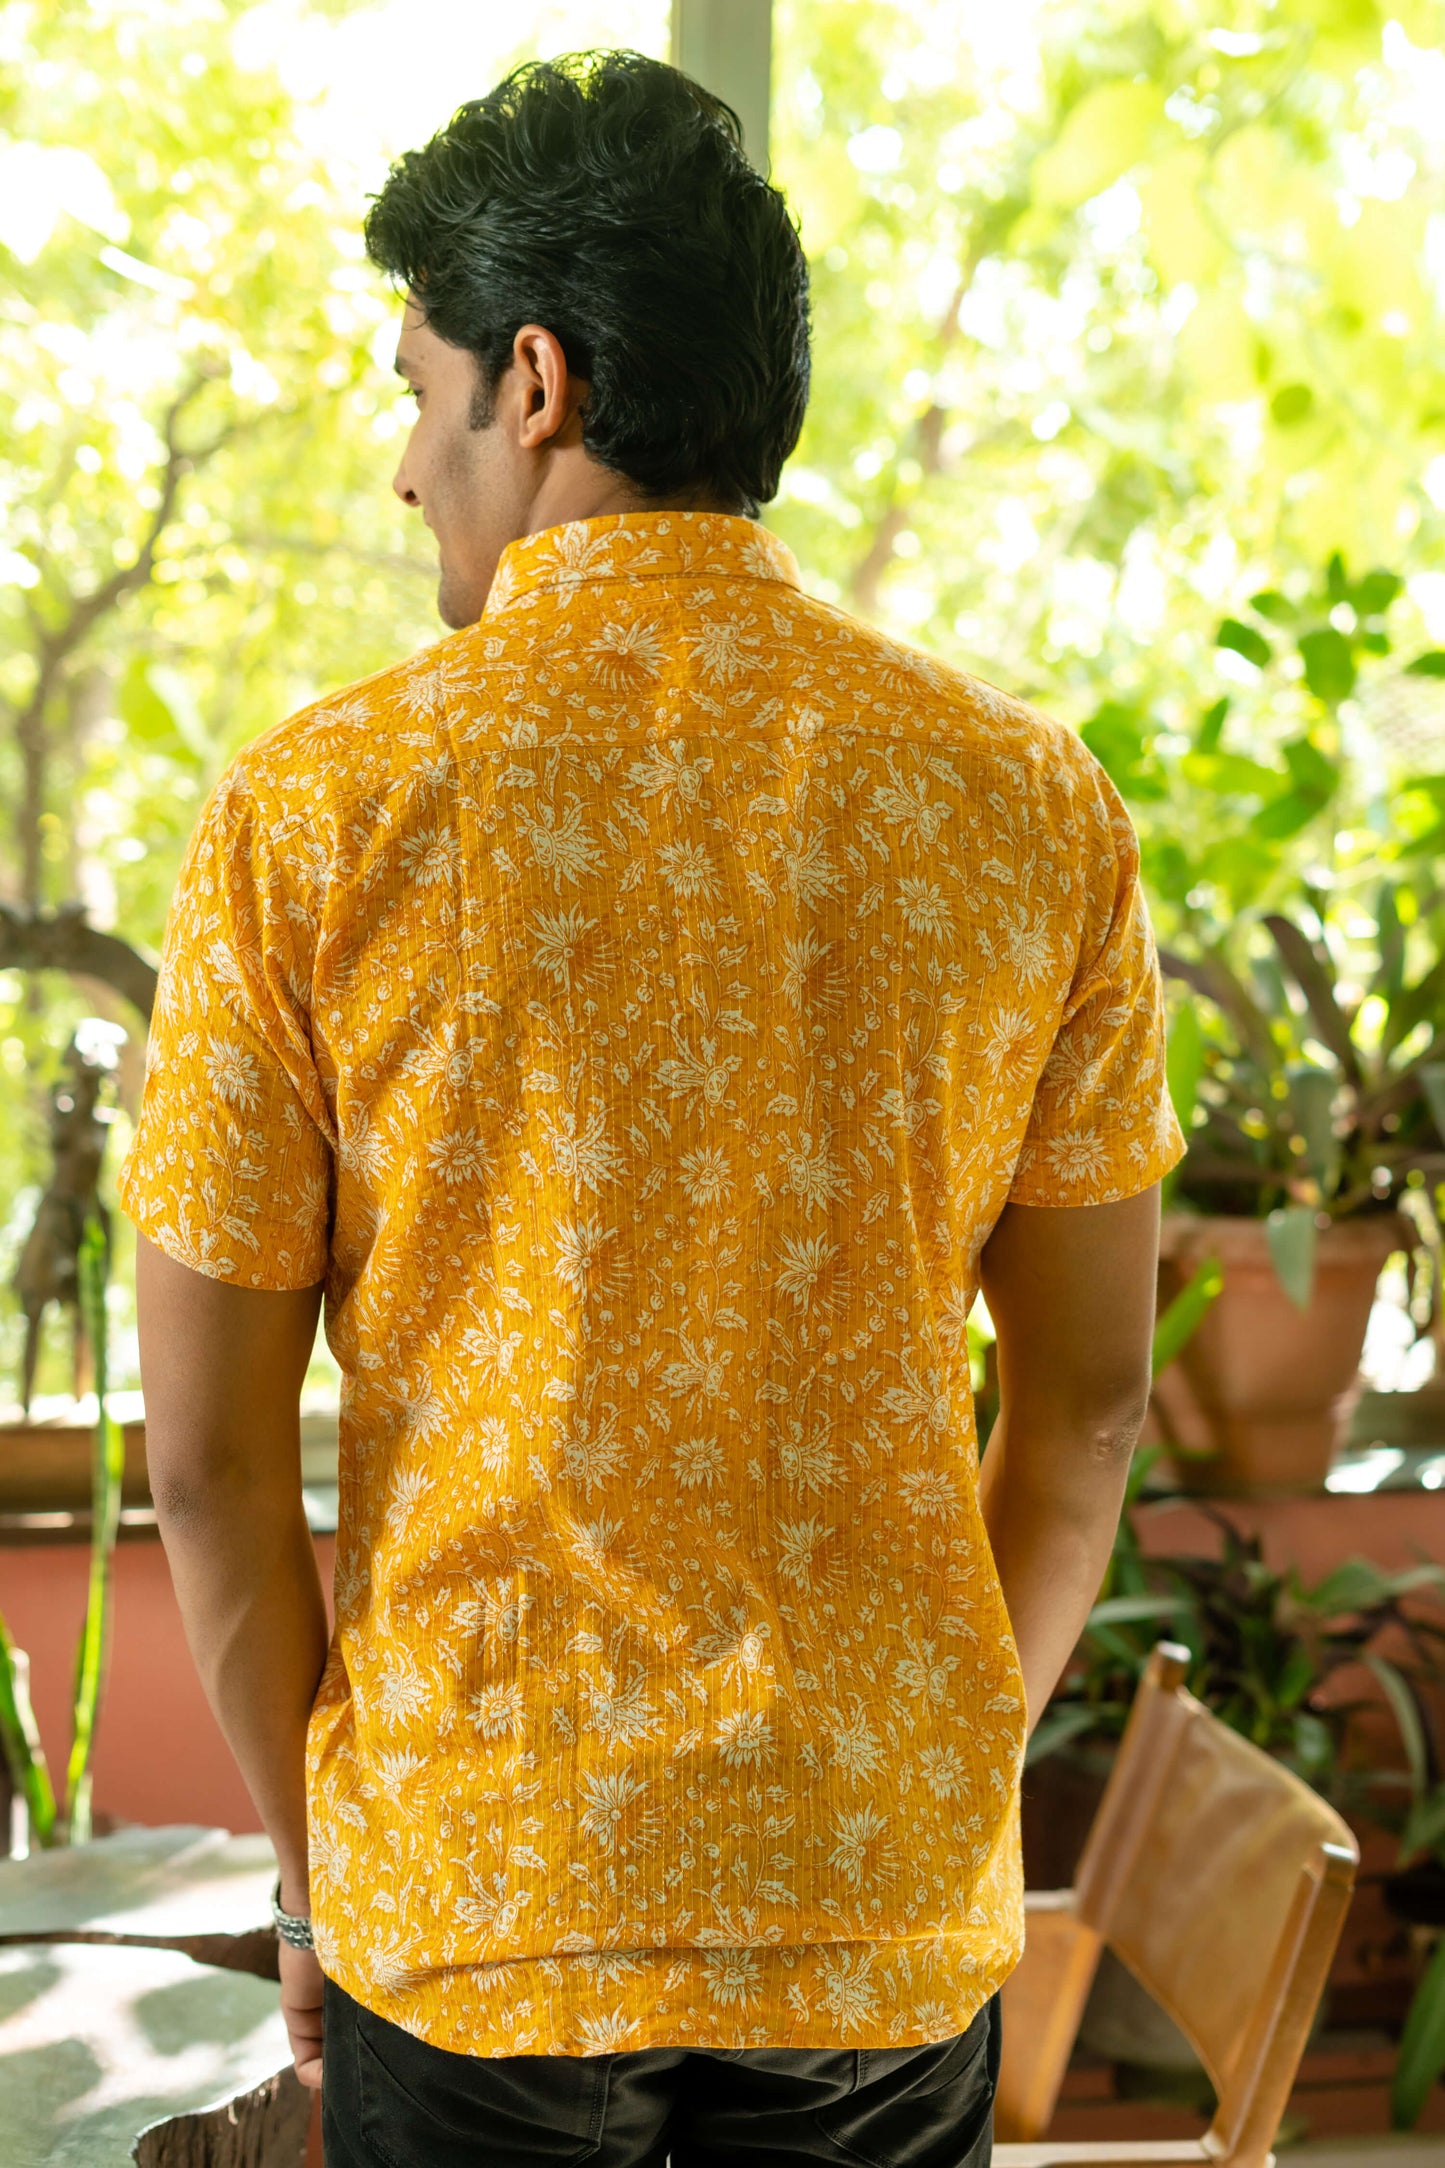 The Yellow Kantha Work Half Sleeves Shirt With All-Over Floral Print